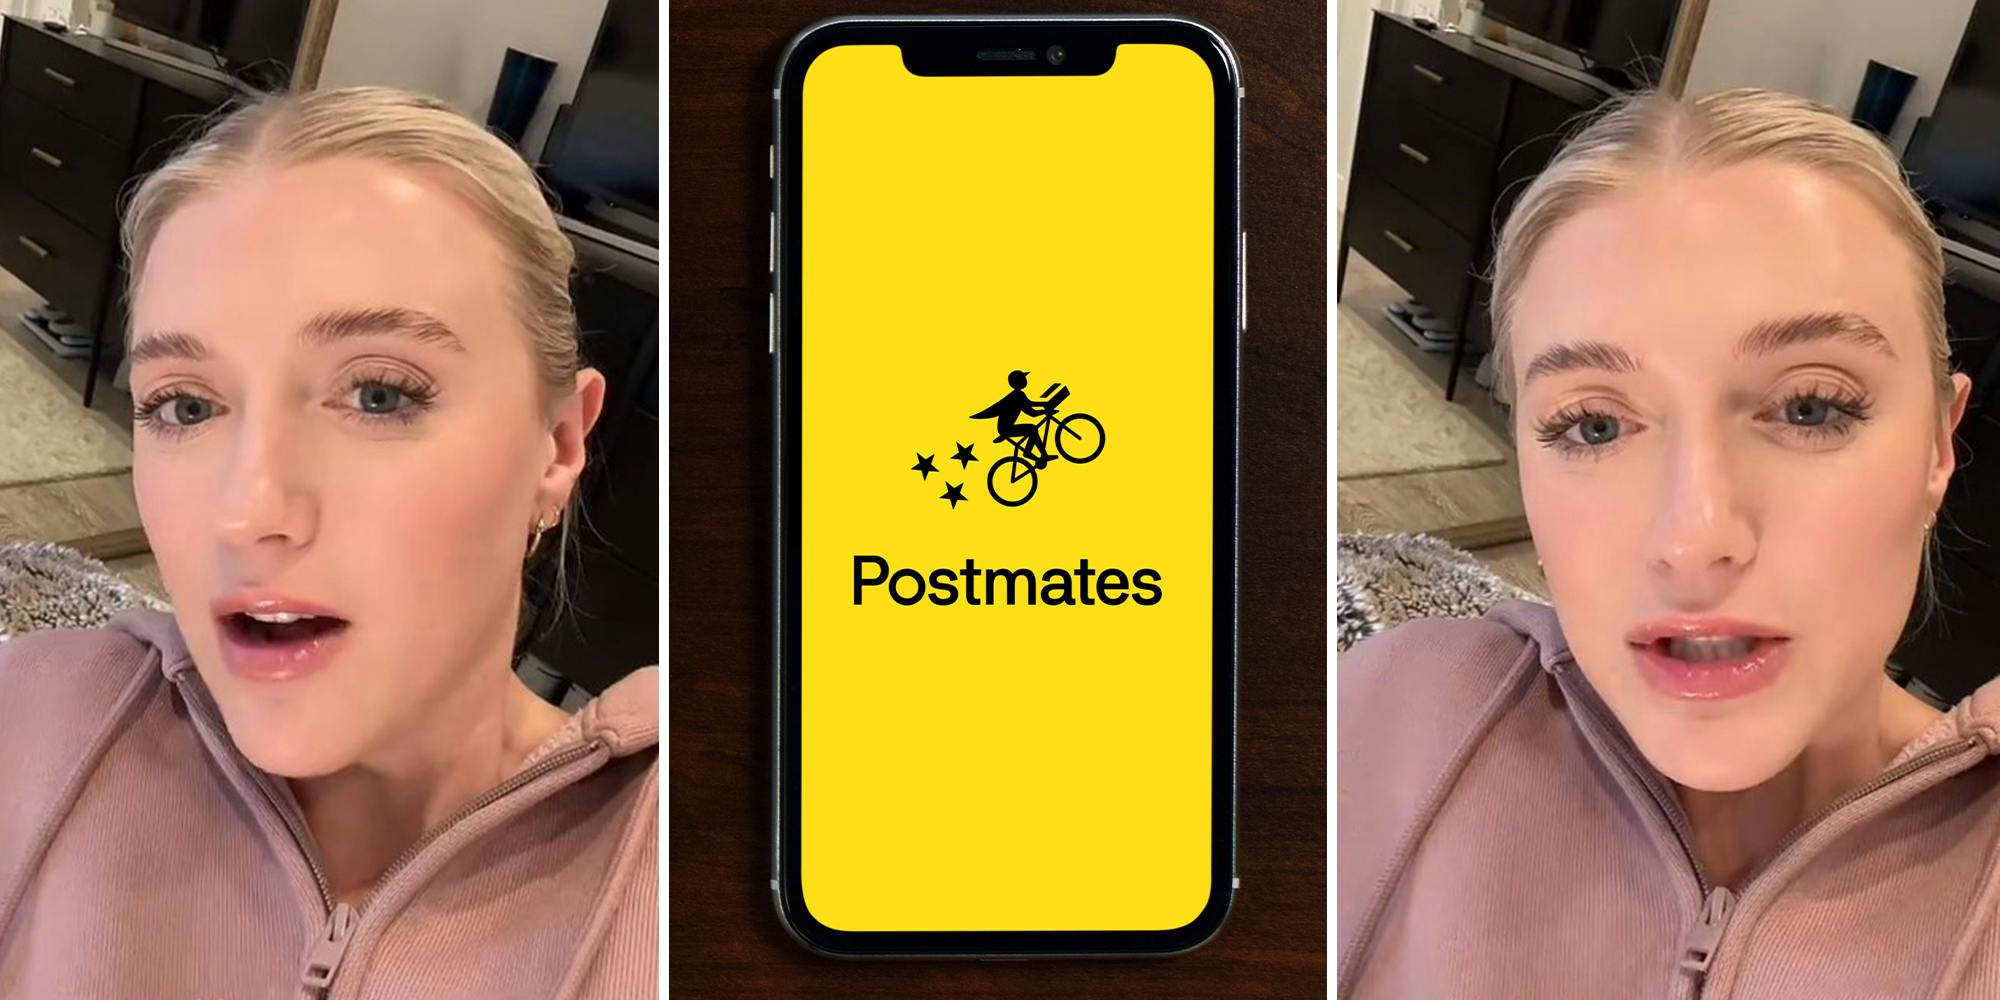 Woman finds out boyfriend was cheating on her through Postmates delivery app